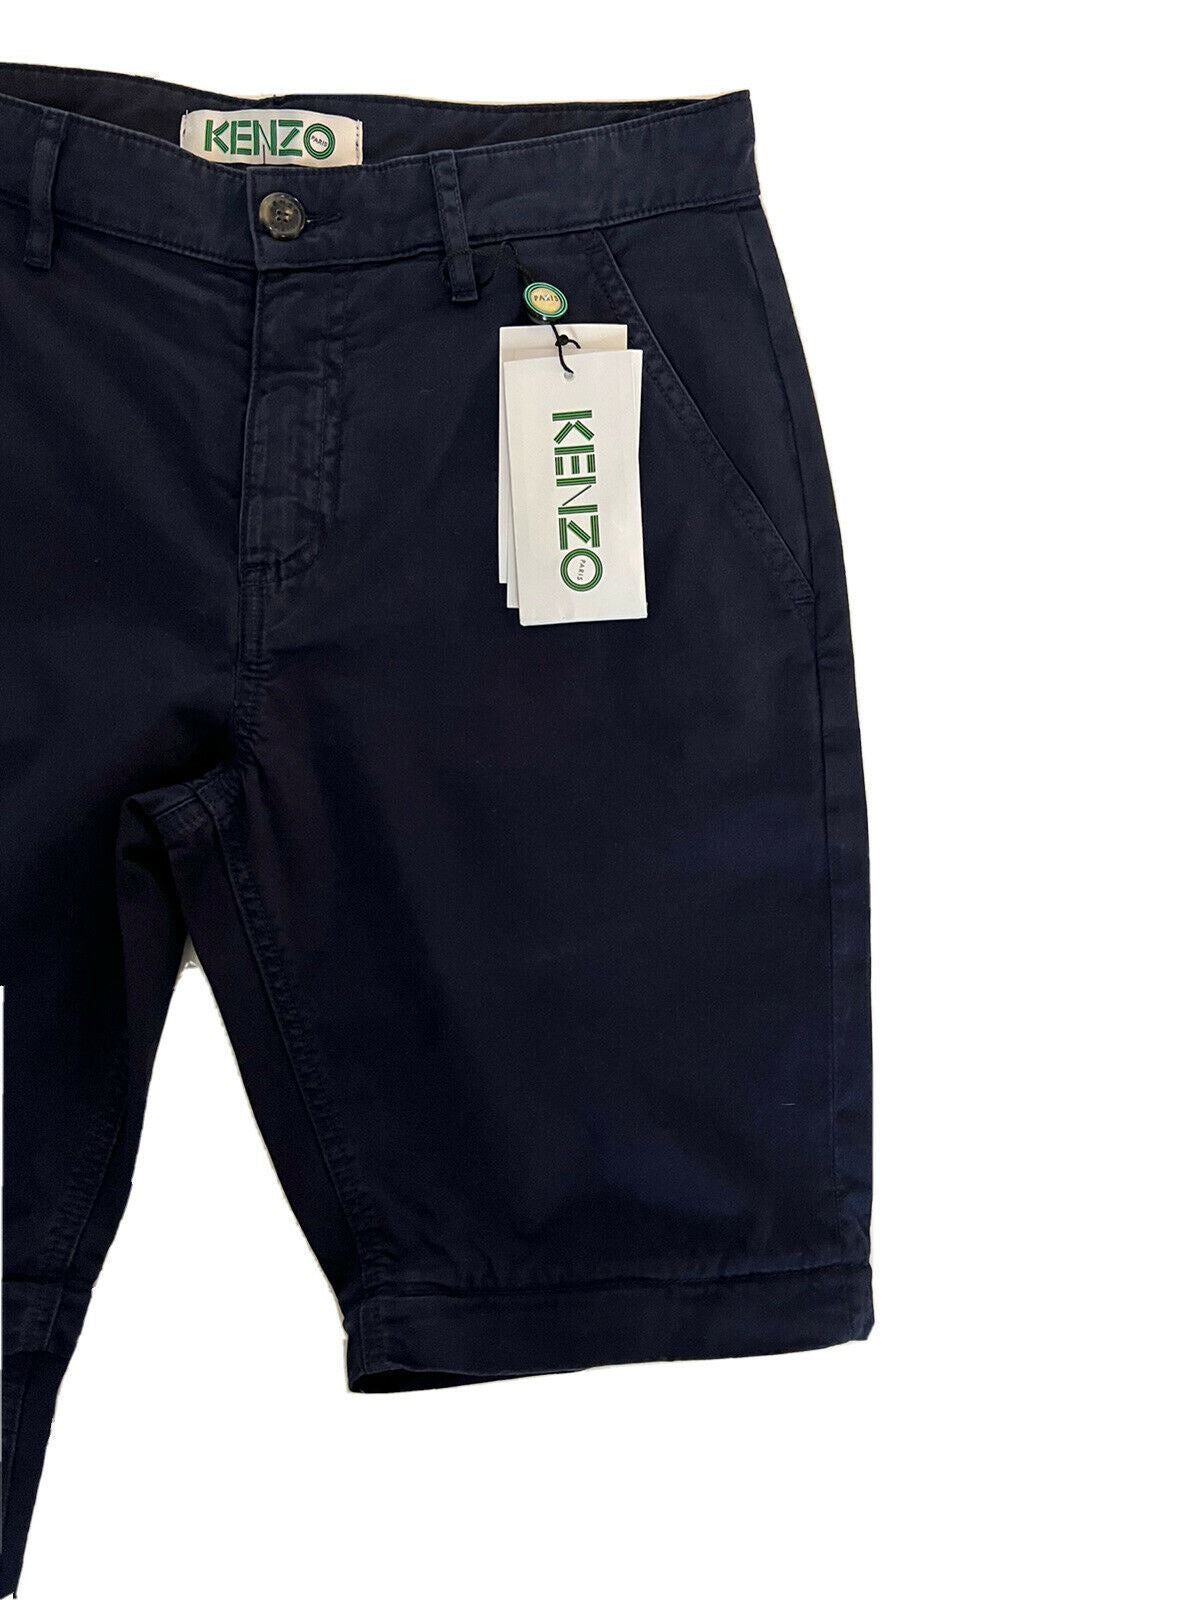 NWT $280 Kenzo Men's Midnight Blue Zip Off Casual Pants Size 28 US (44 Euro)